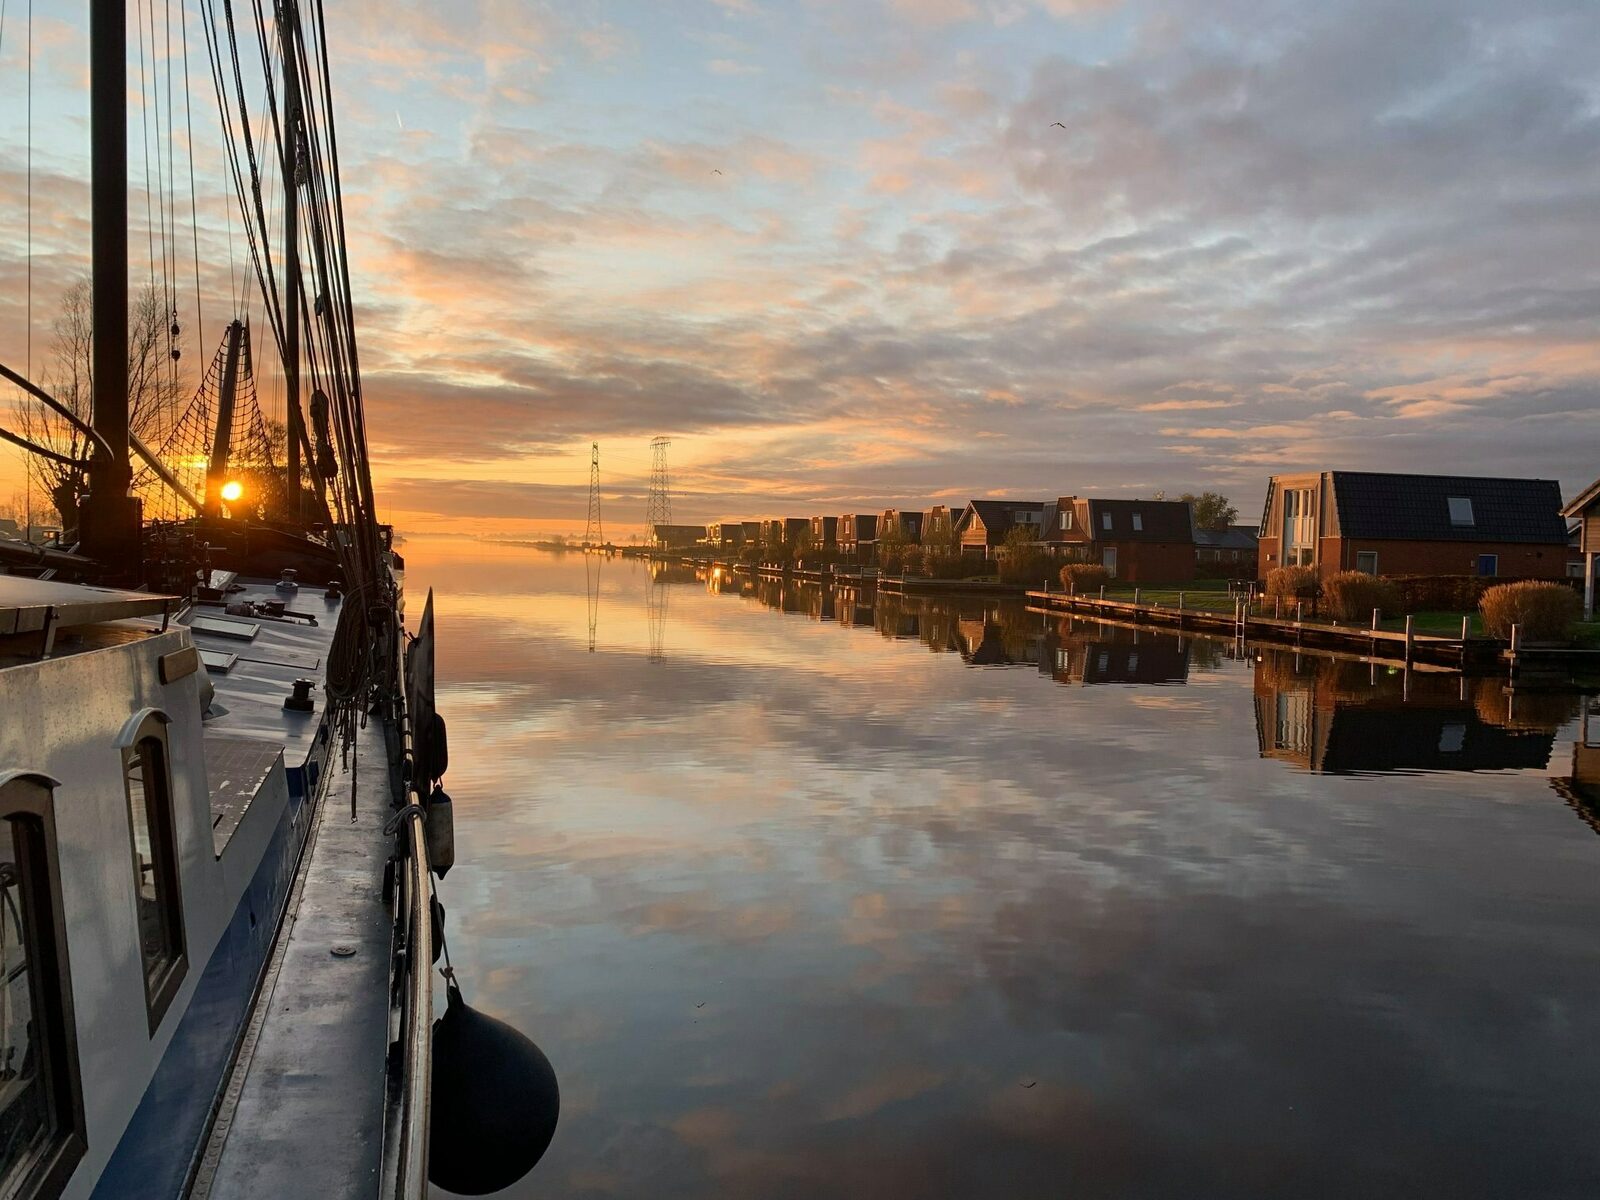 Discover Friesland during the Fall and Winter